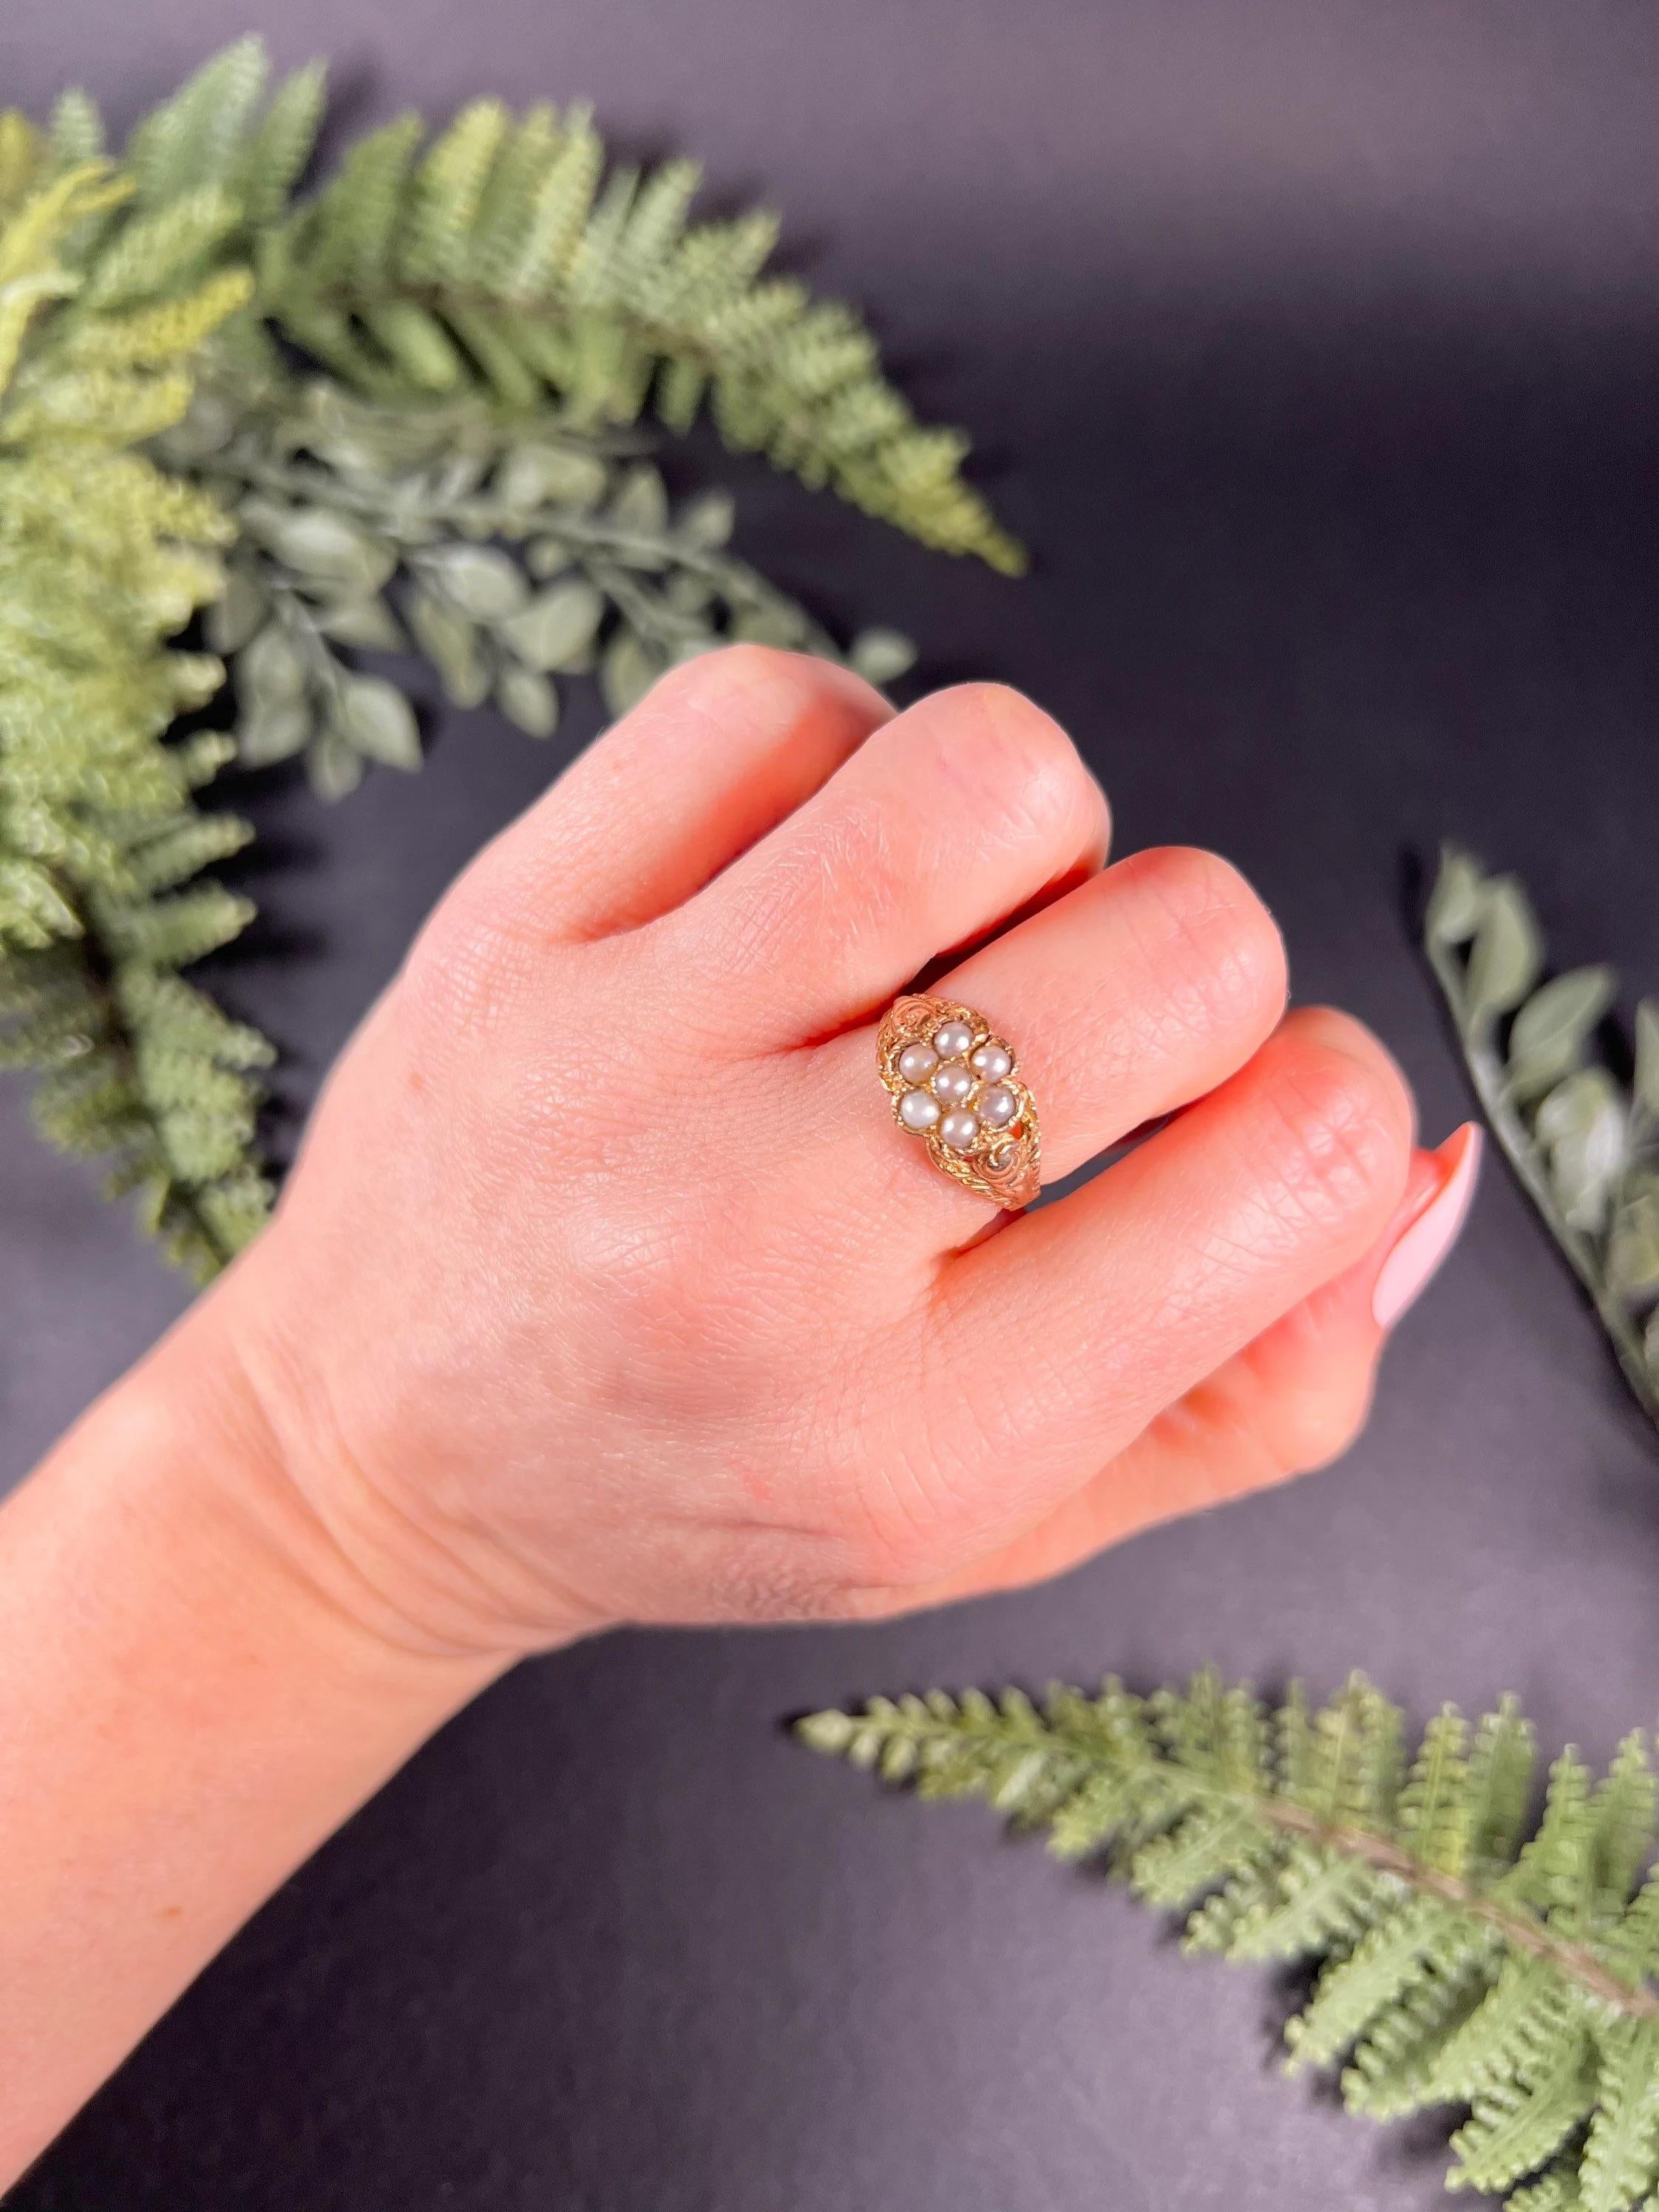 Antique Daisy Cluster Ring

9ct Gold Stamped 

Circa 1880

Hallmark Has Rubbed

Pretty, Victorian cluster ring. Set with a natural seed pearl centre, plus a cluster of natural seed pearls making a beautiful daisy formation. 
The ring features